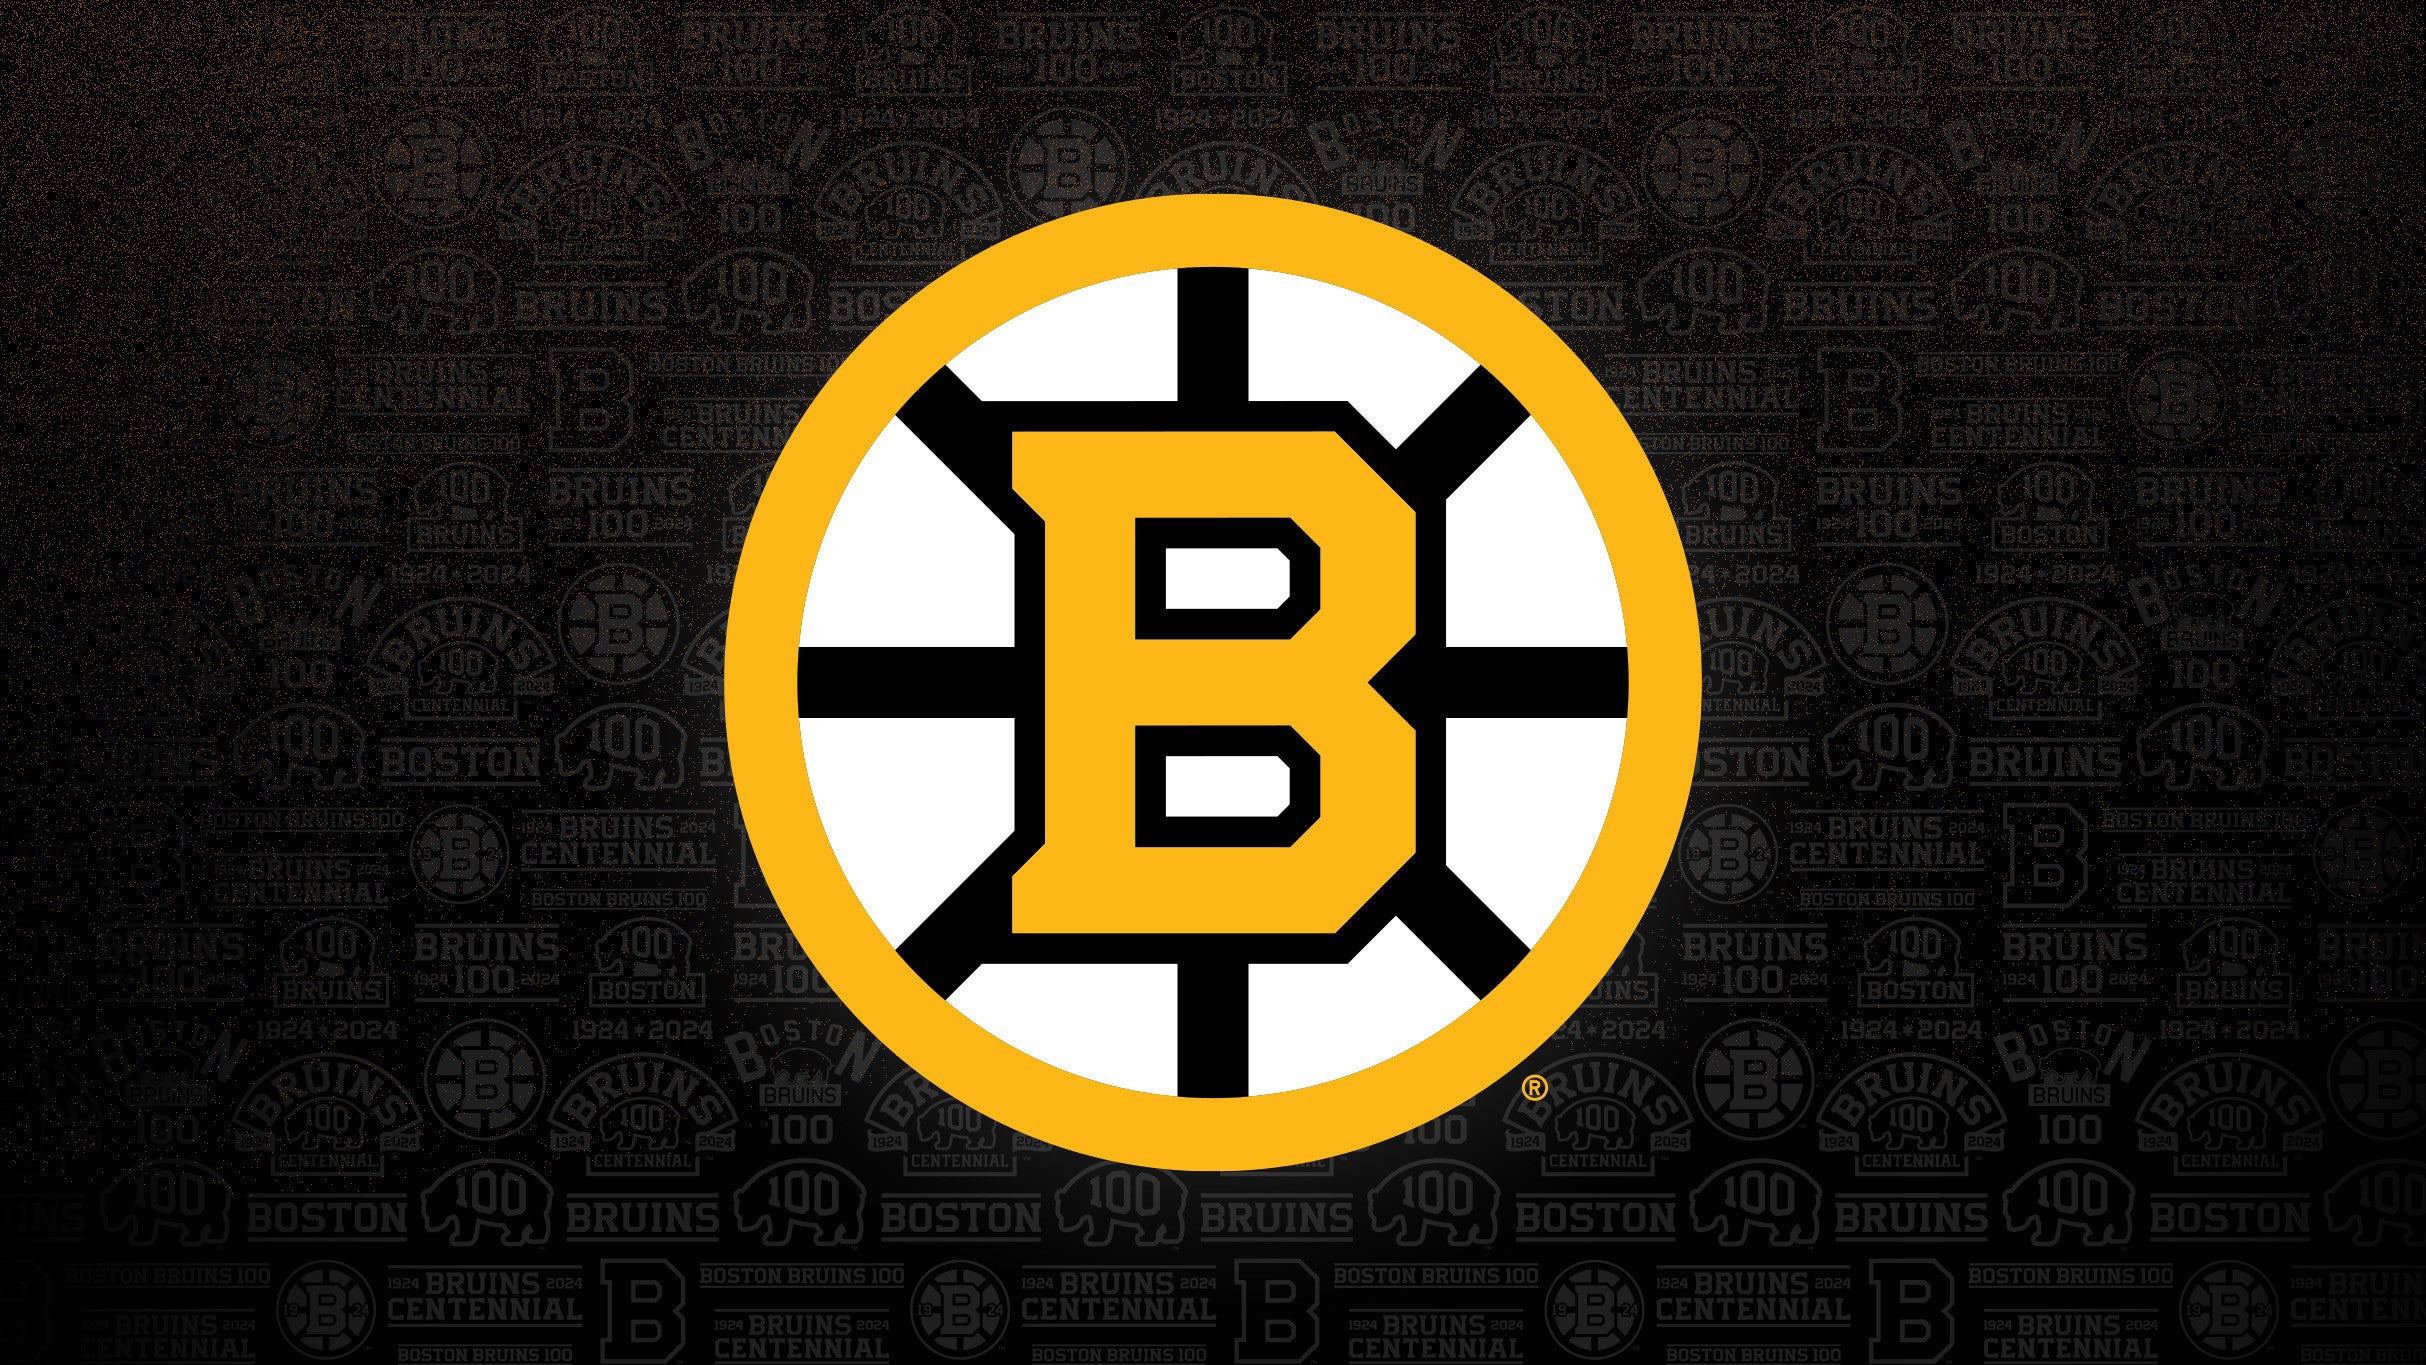 First Round Gm 5: Maple Leafs at Bruins Rd 1 Hm Gm 3